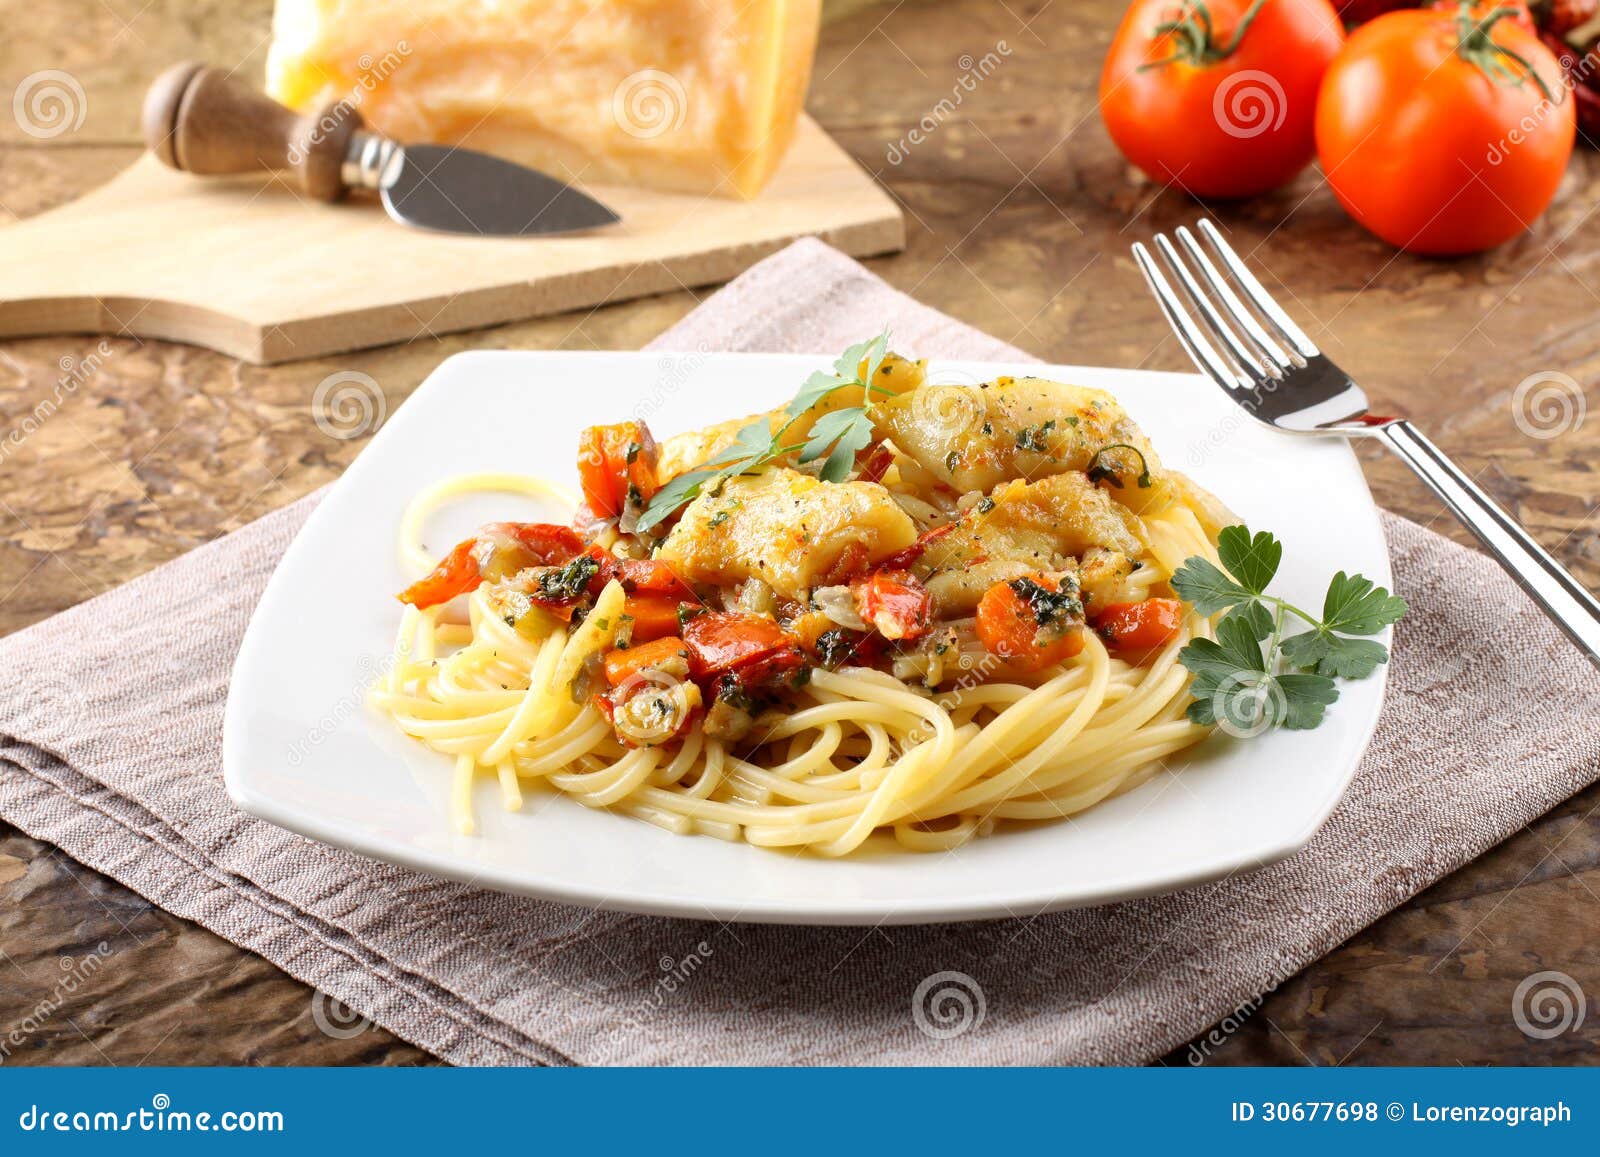 Pasta with Fresh Grouper Fillet Stock Photo - Image of meal, napkin ...